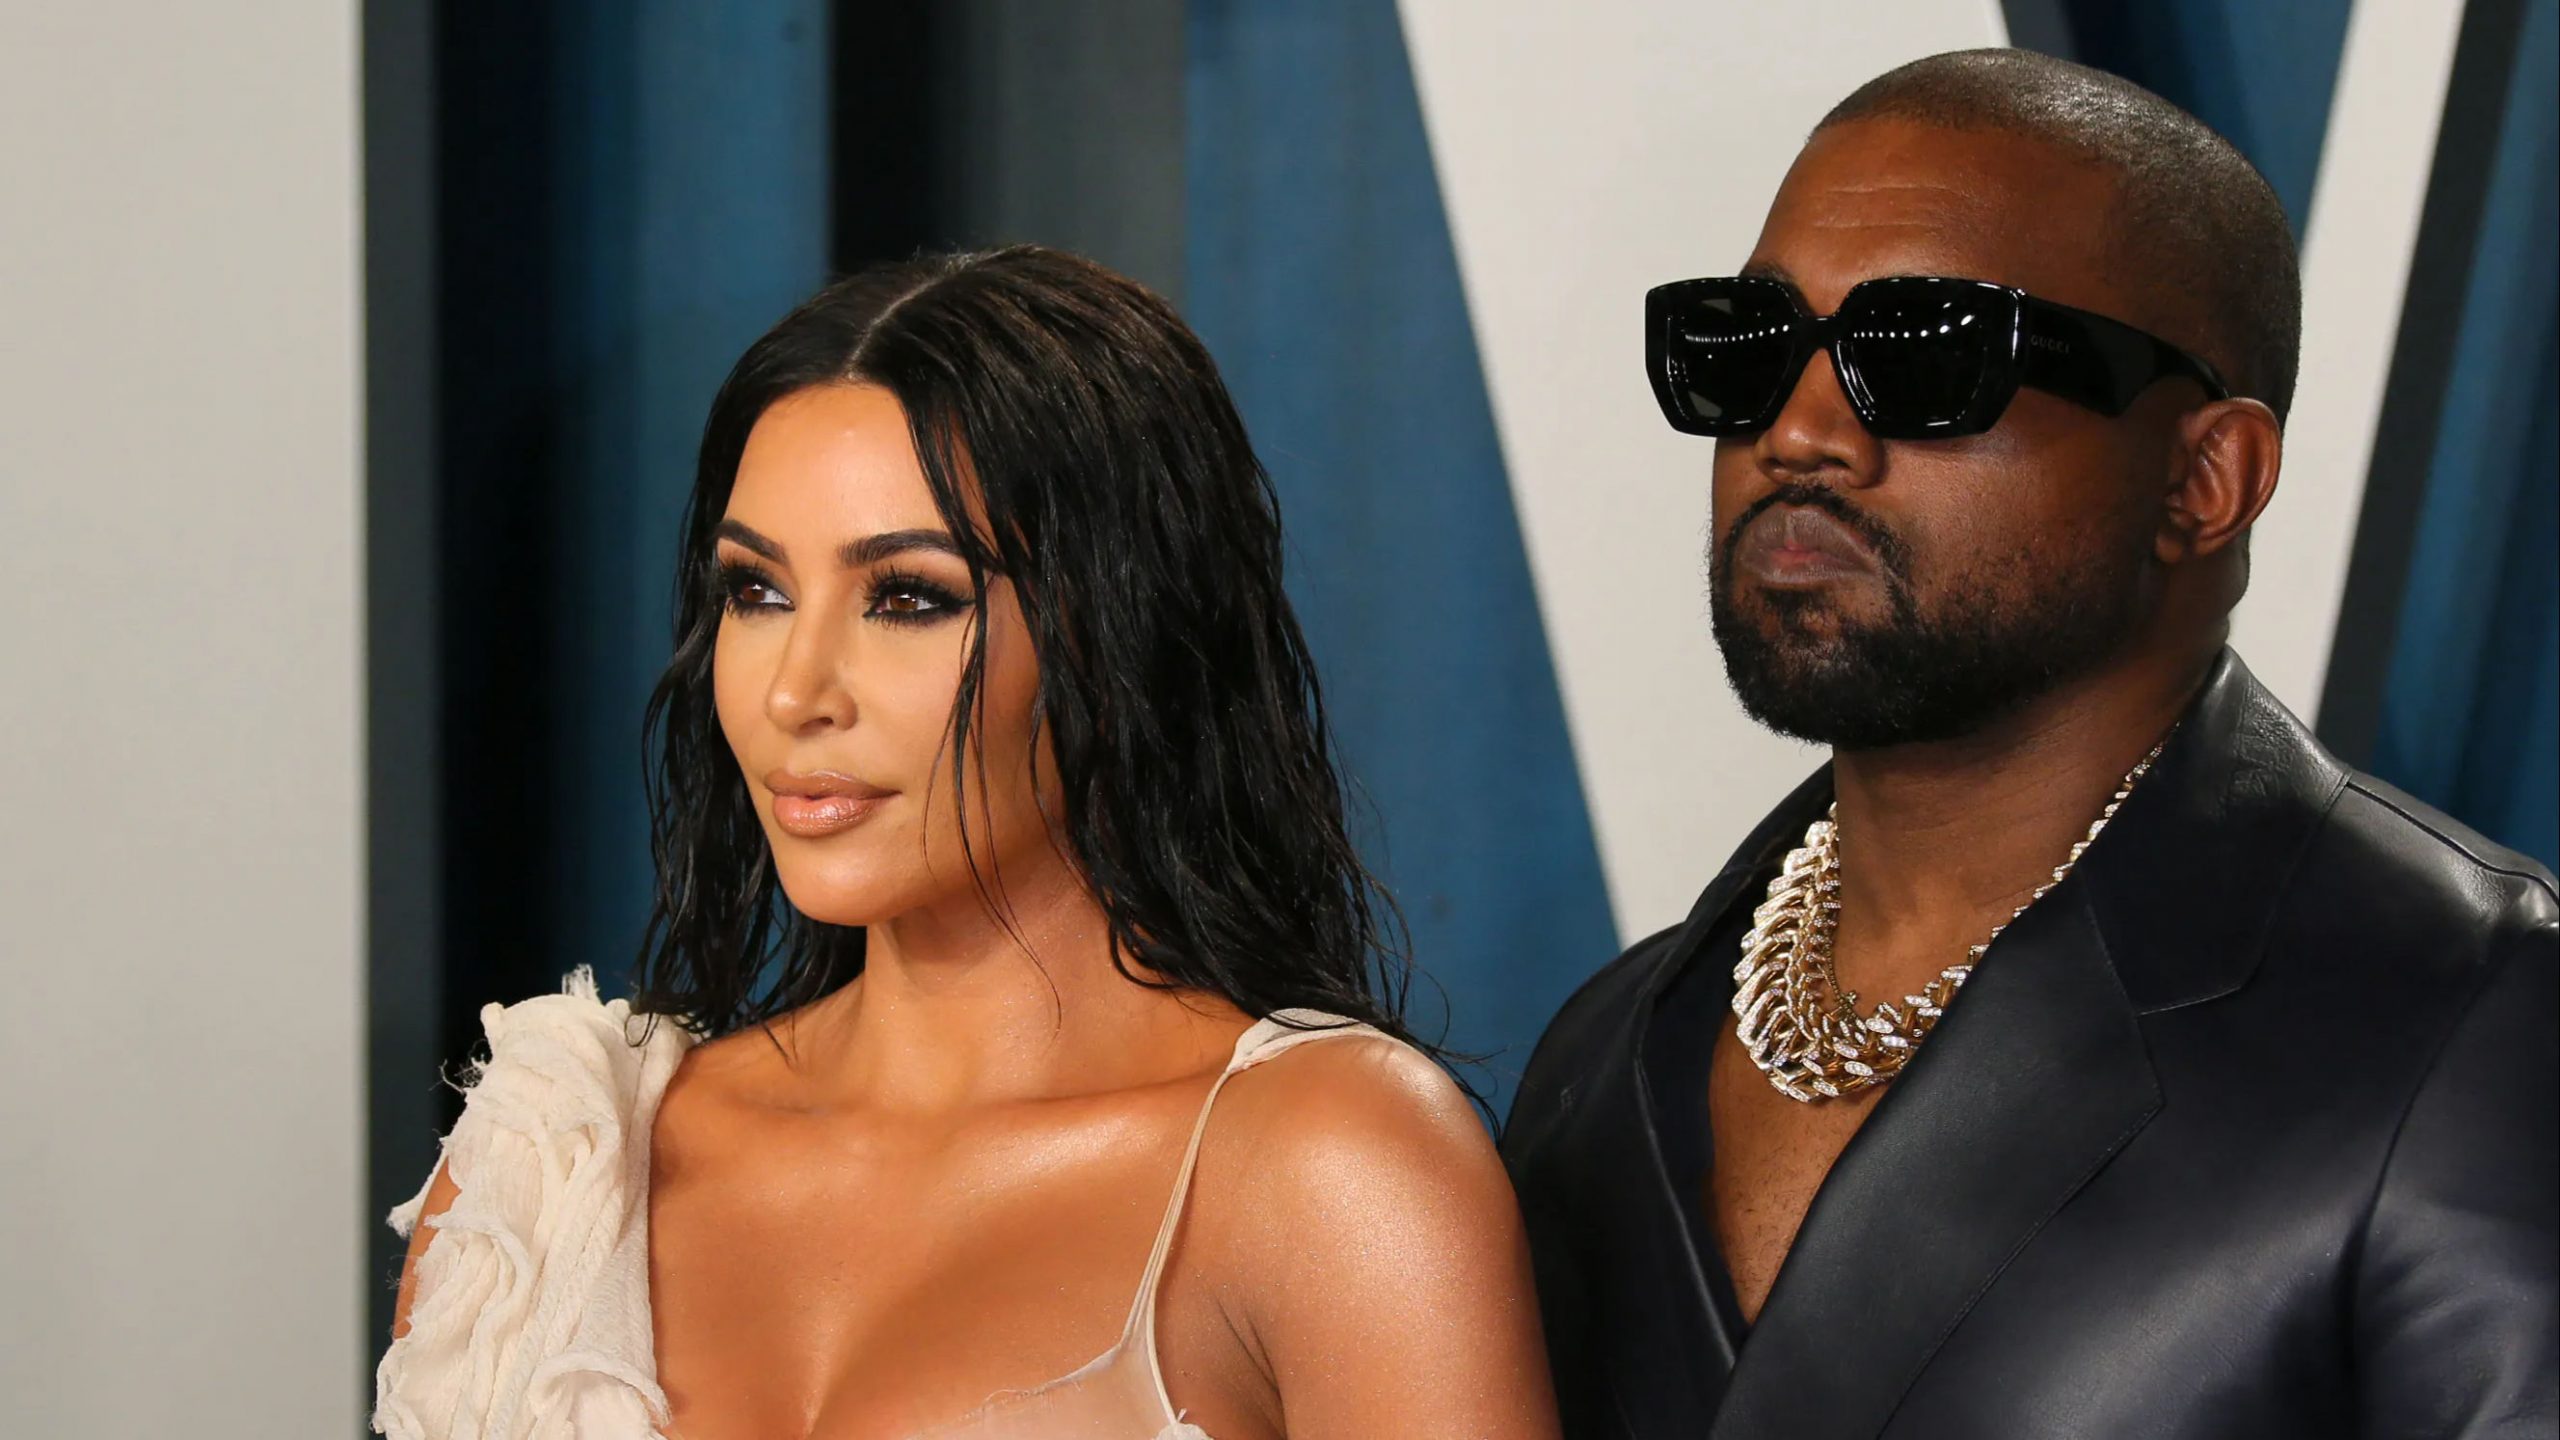 Kim Kardashian files to divorce Kanye West after almost 7 years of marriage